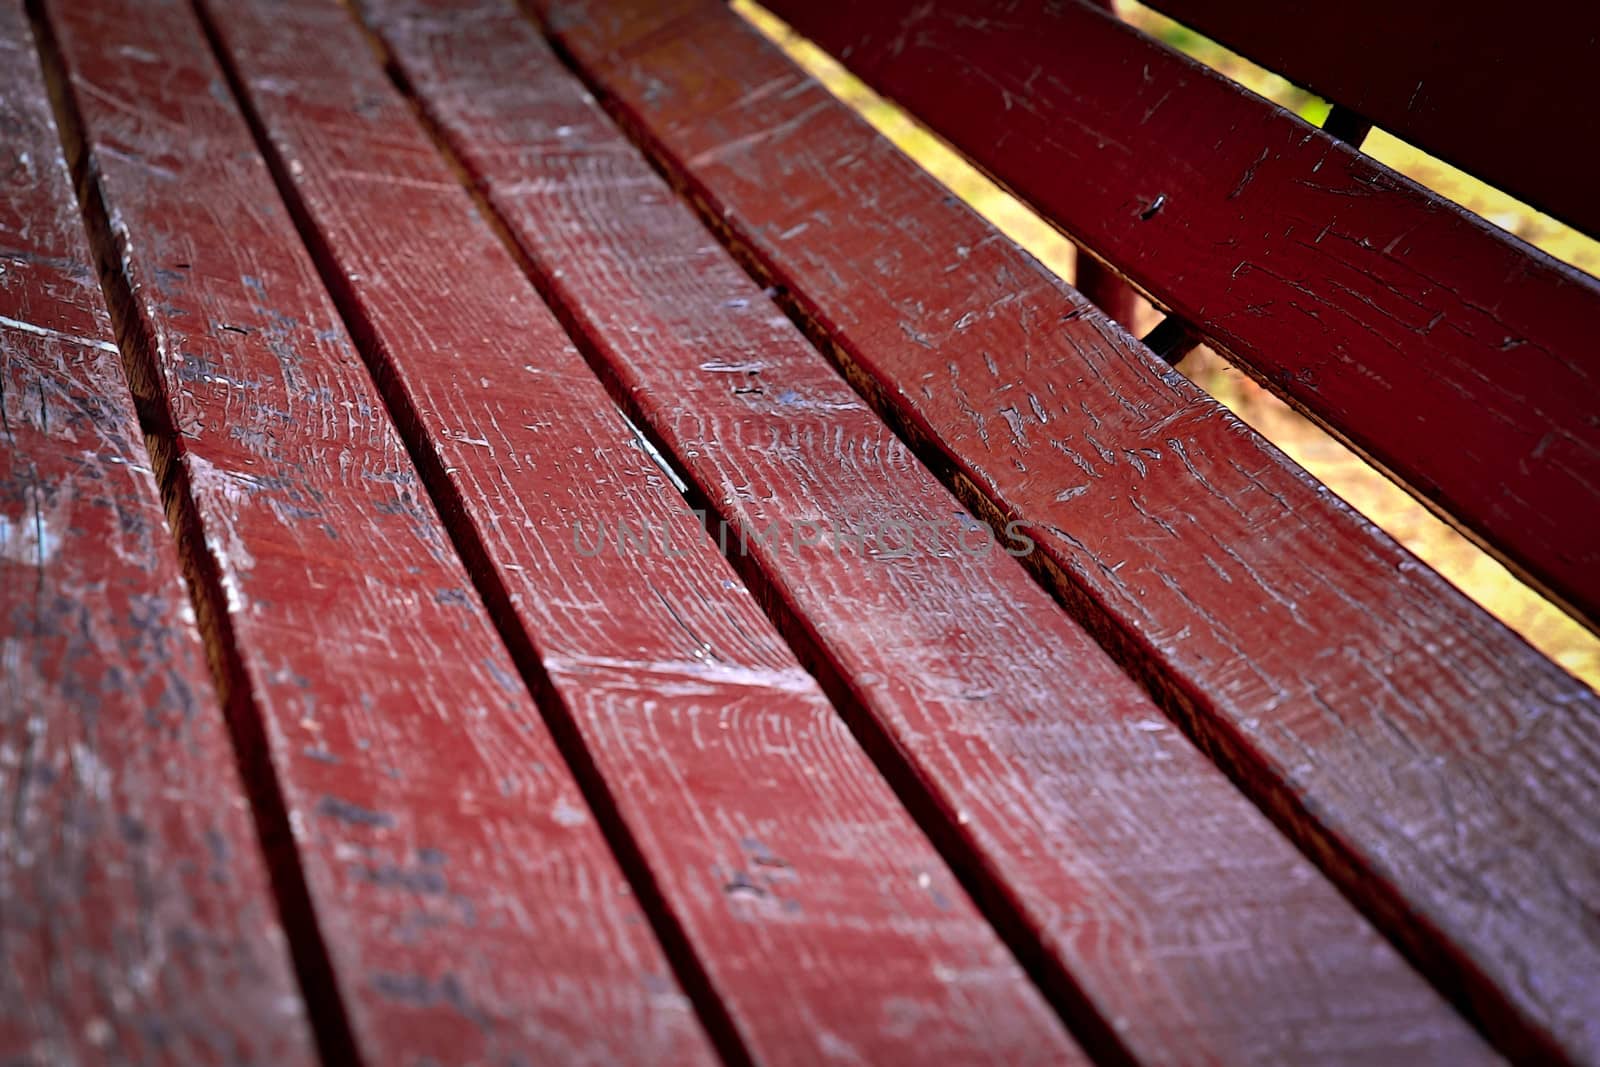 background detail of a wooden benches in the park burgundy color